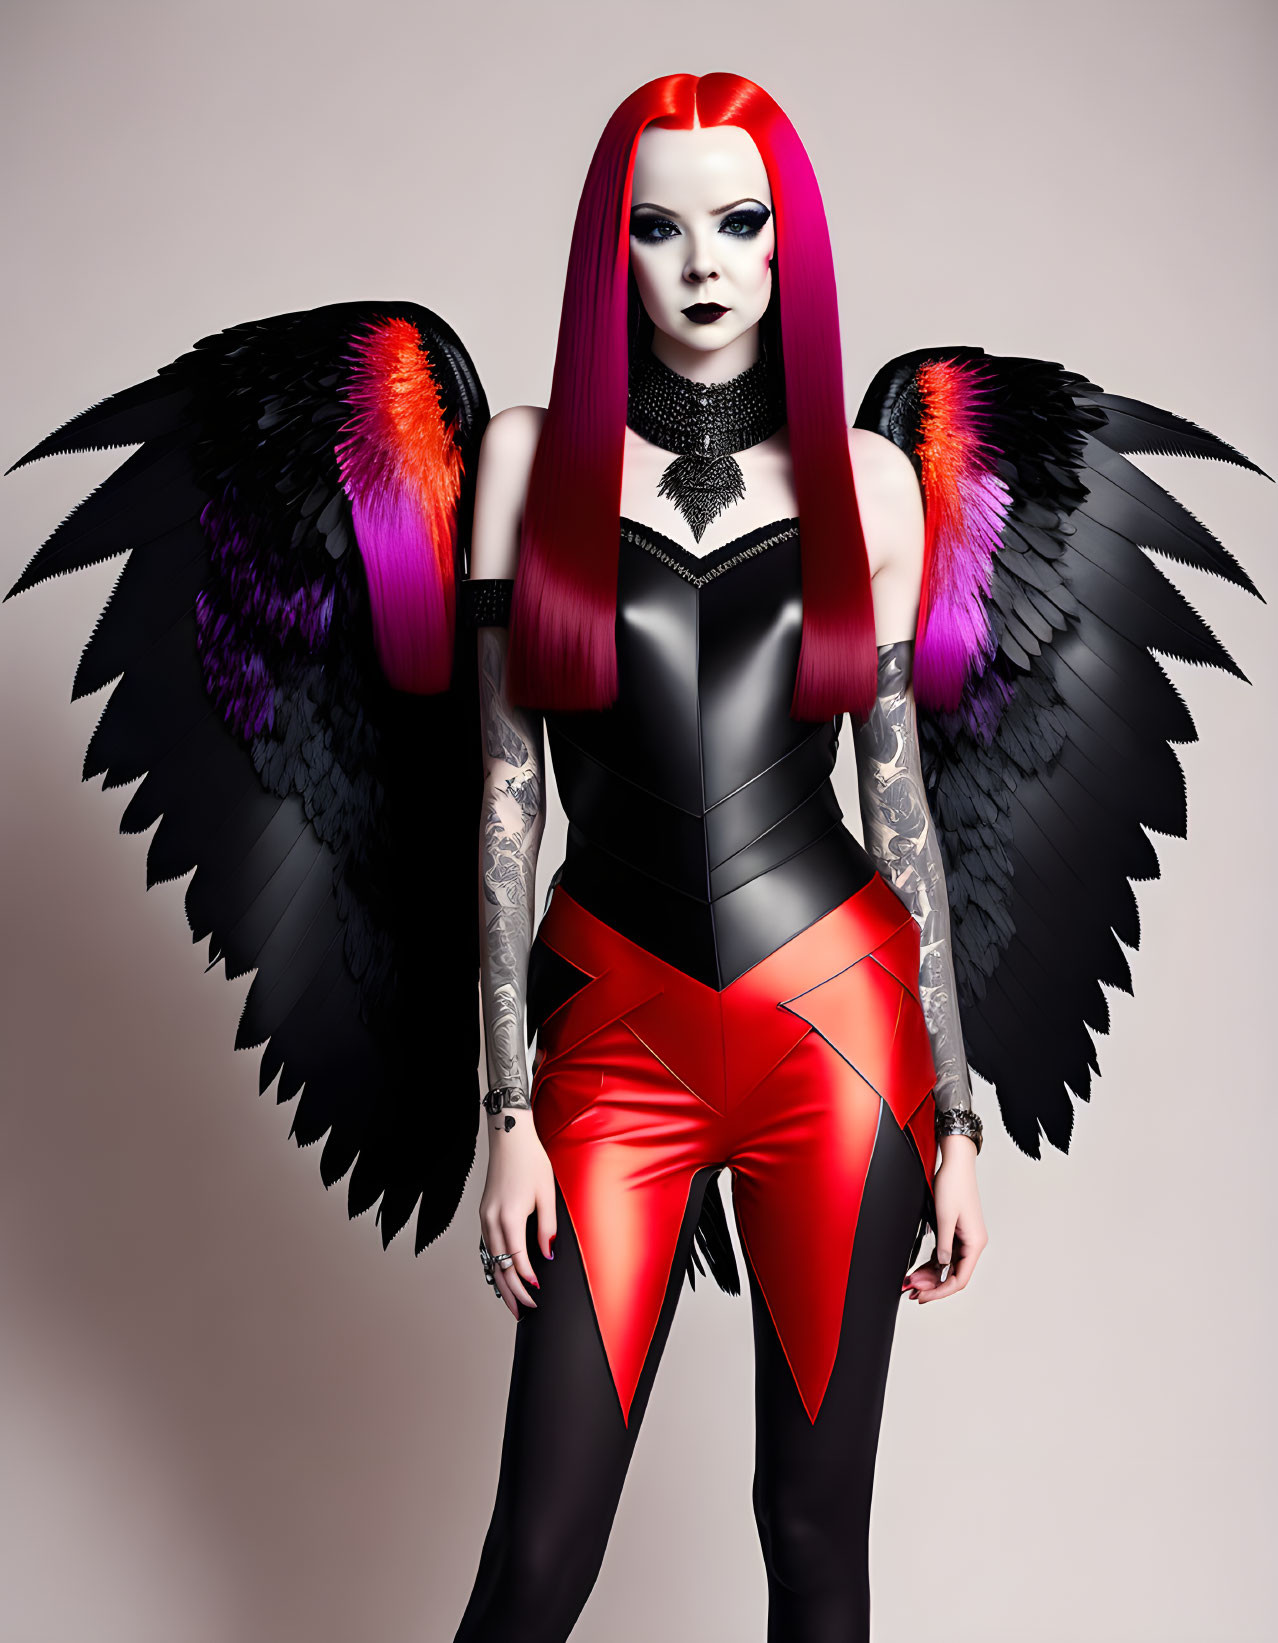 Vibrant Red and Black Hair, Large Wings with Orange Highlights, Black Outfit, Red S